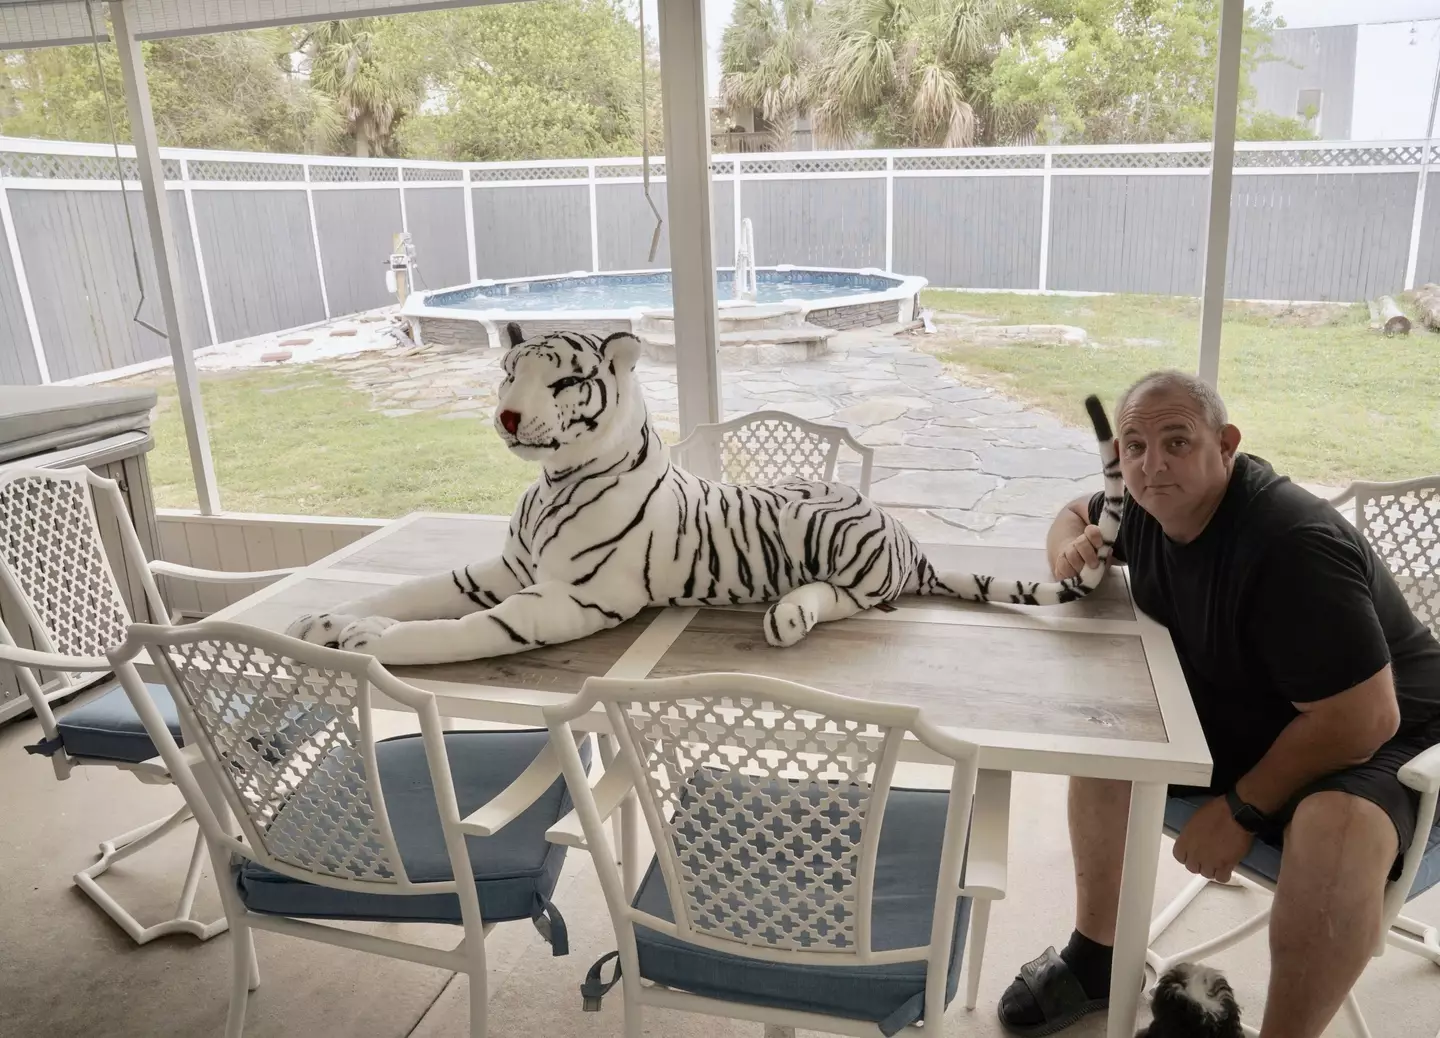 The Florida home will come with a discount if Richard Chaillou can stick around.